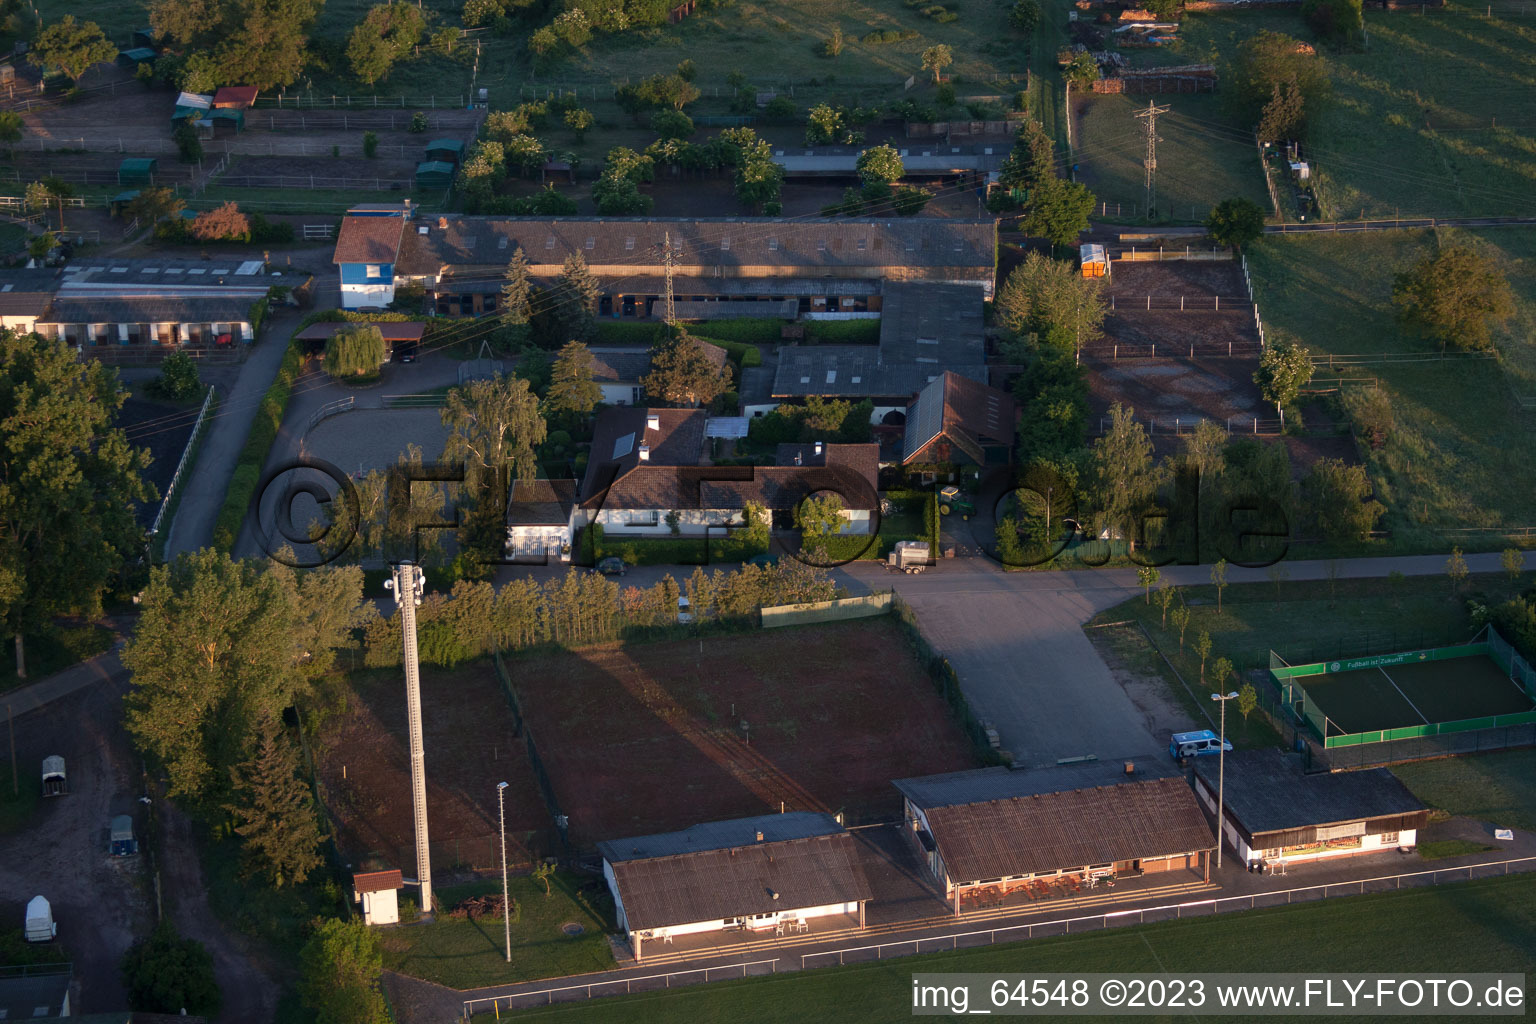 Aerial photograpy of Riding and driving club e. V. Billigheim in the district Billigheim in Billigheim-Ingenheim in the state Rhineland-Palatinate, Germany